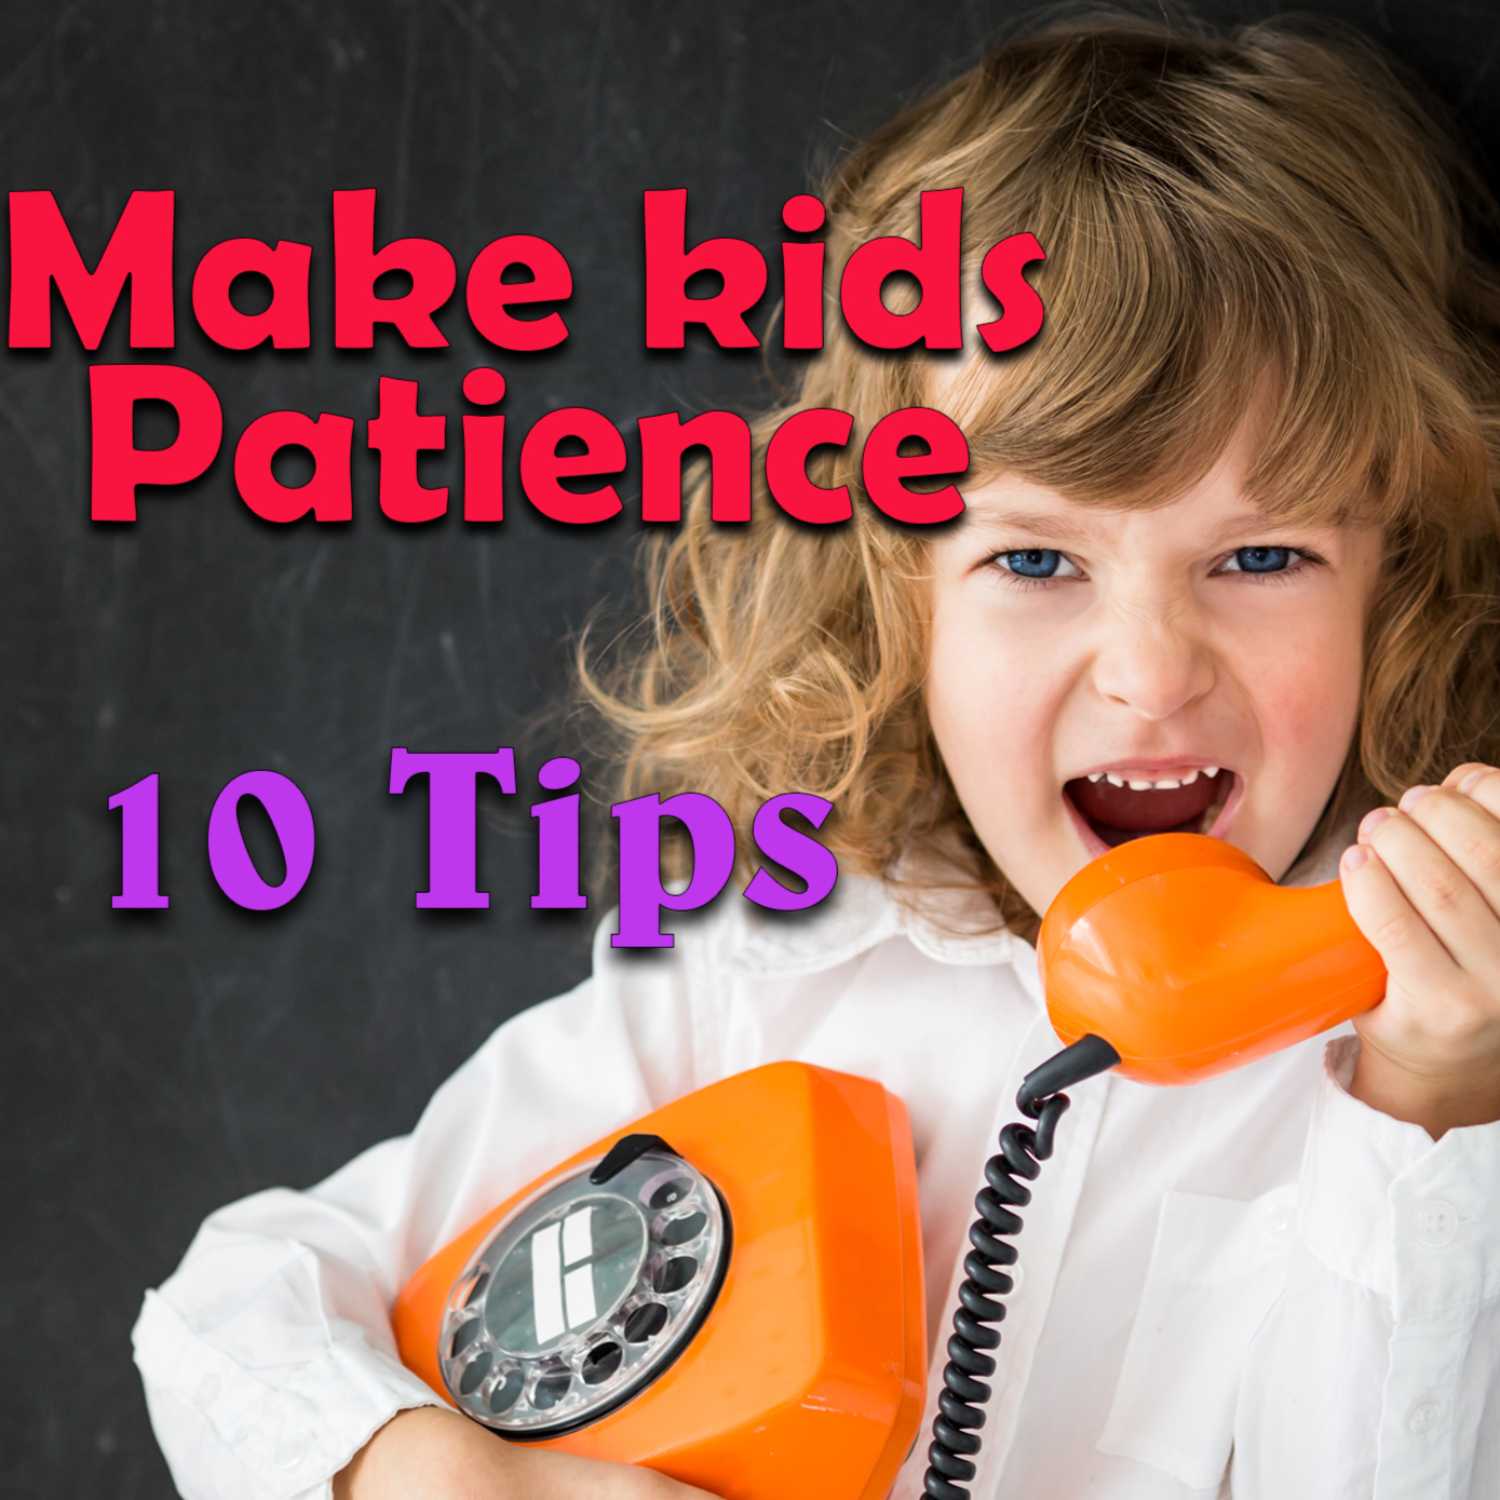 Tips to work patience with minors